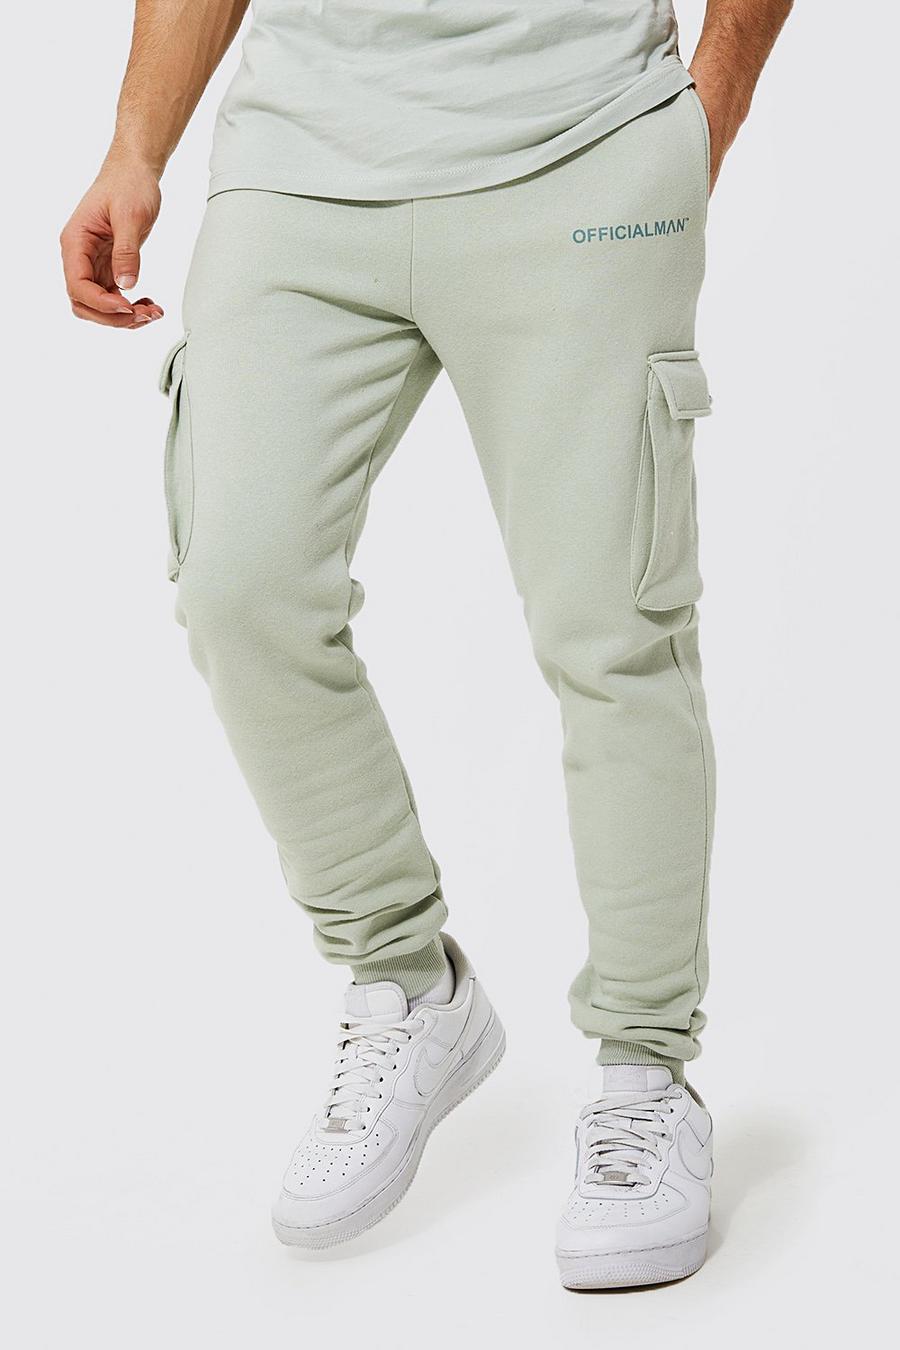 Sage green Official Man Skinny Fit Cargo Jogger